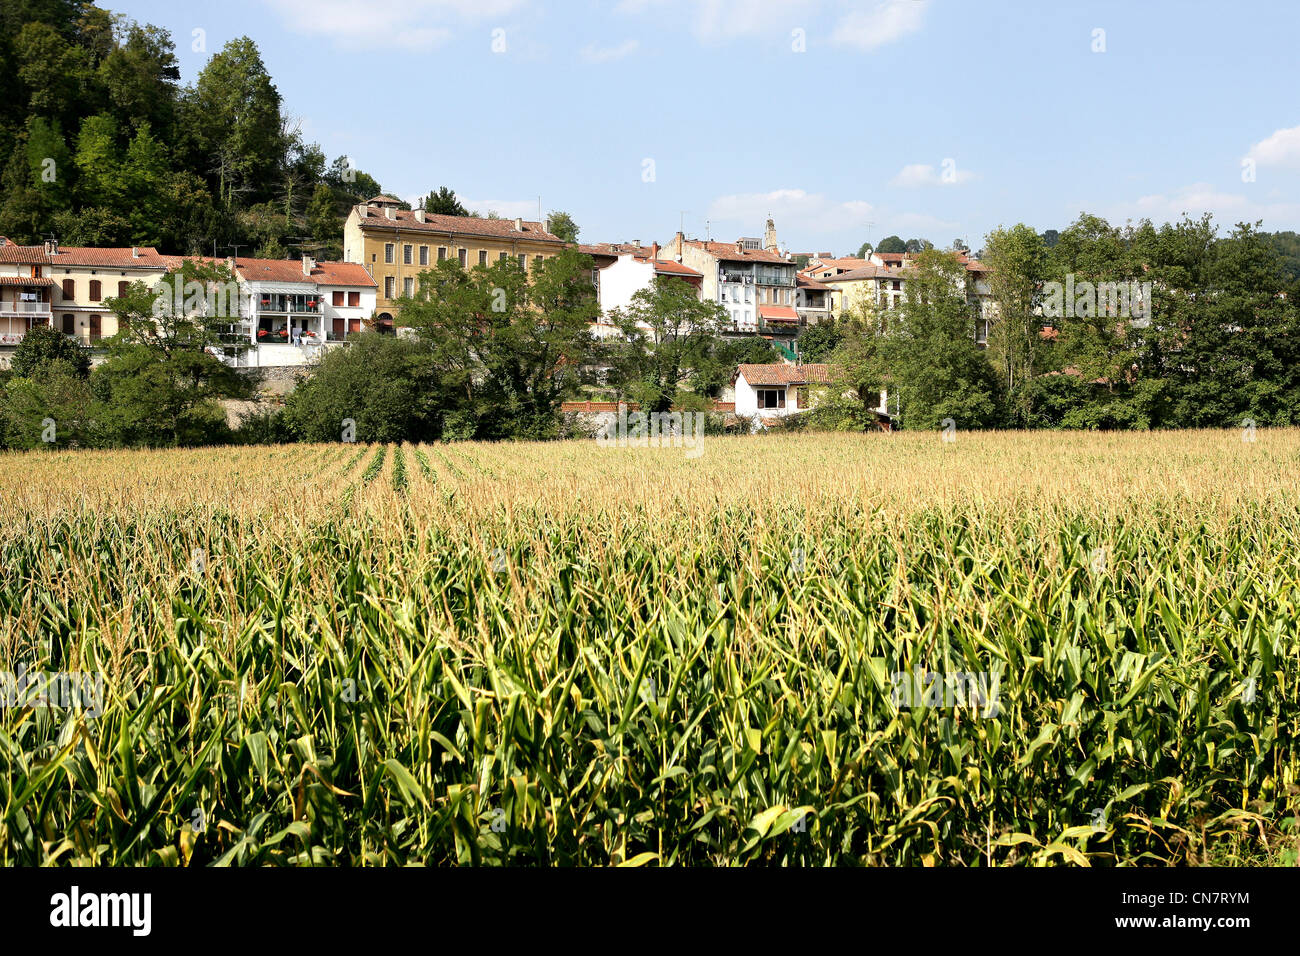 Village surrounded by a crop field Stock Photo